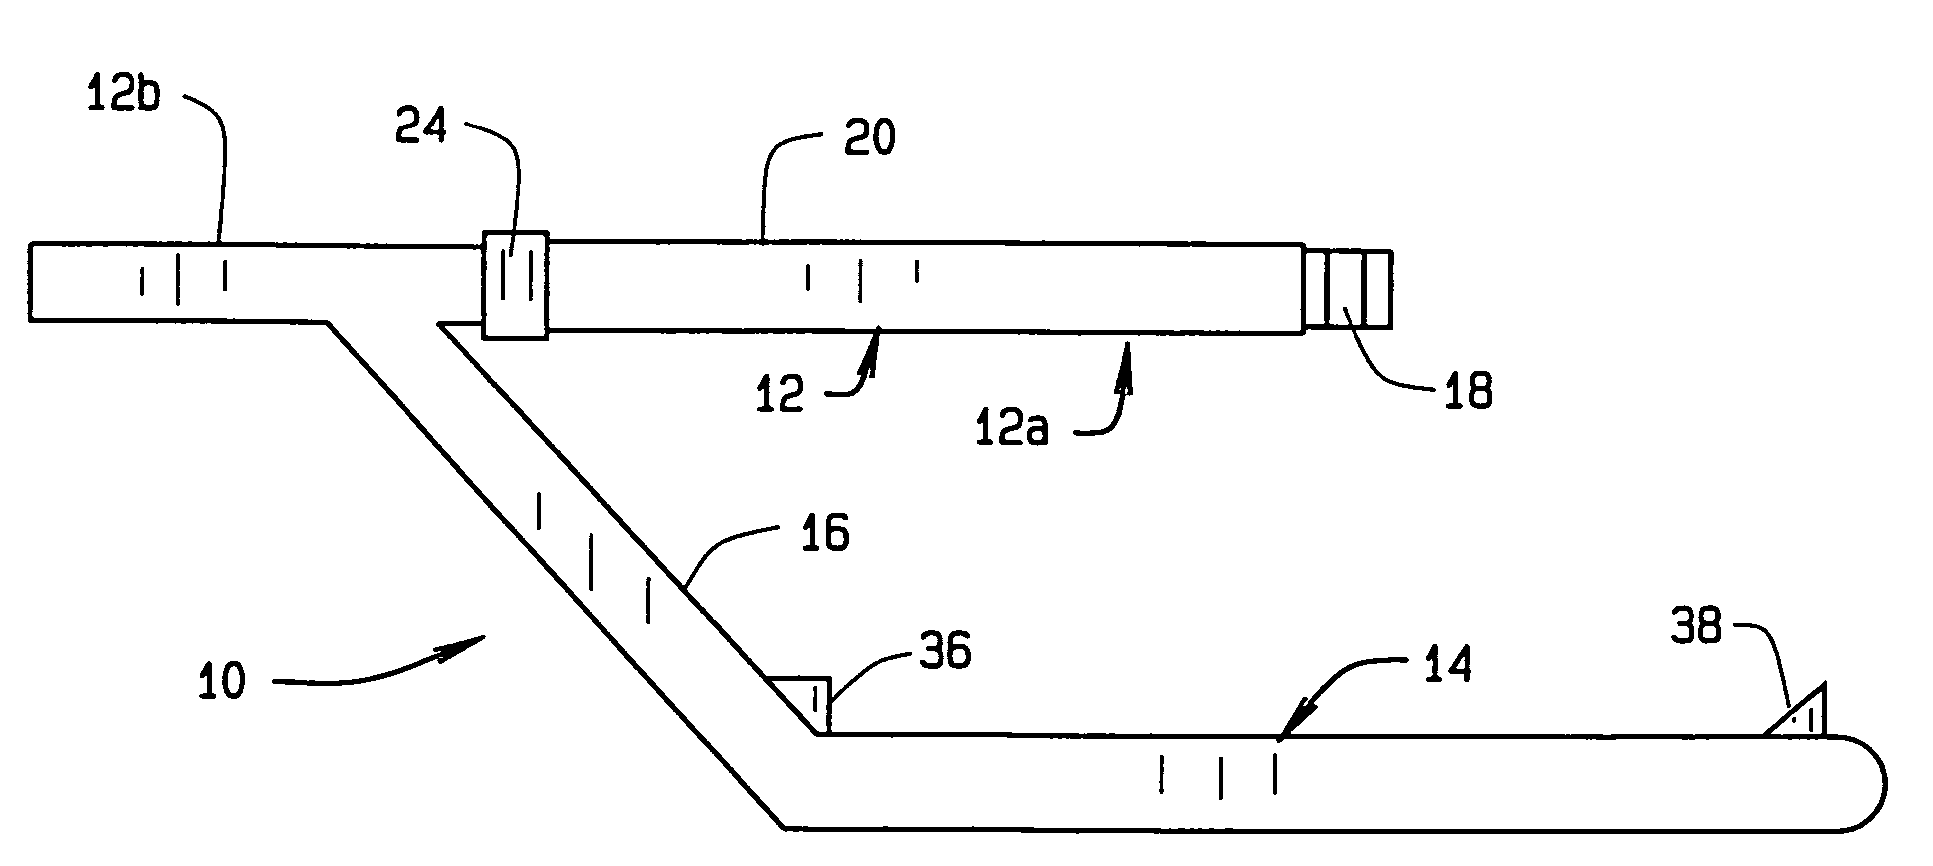 Tool insertion device for use in minimally invasive surgery